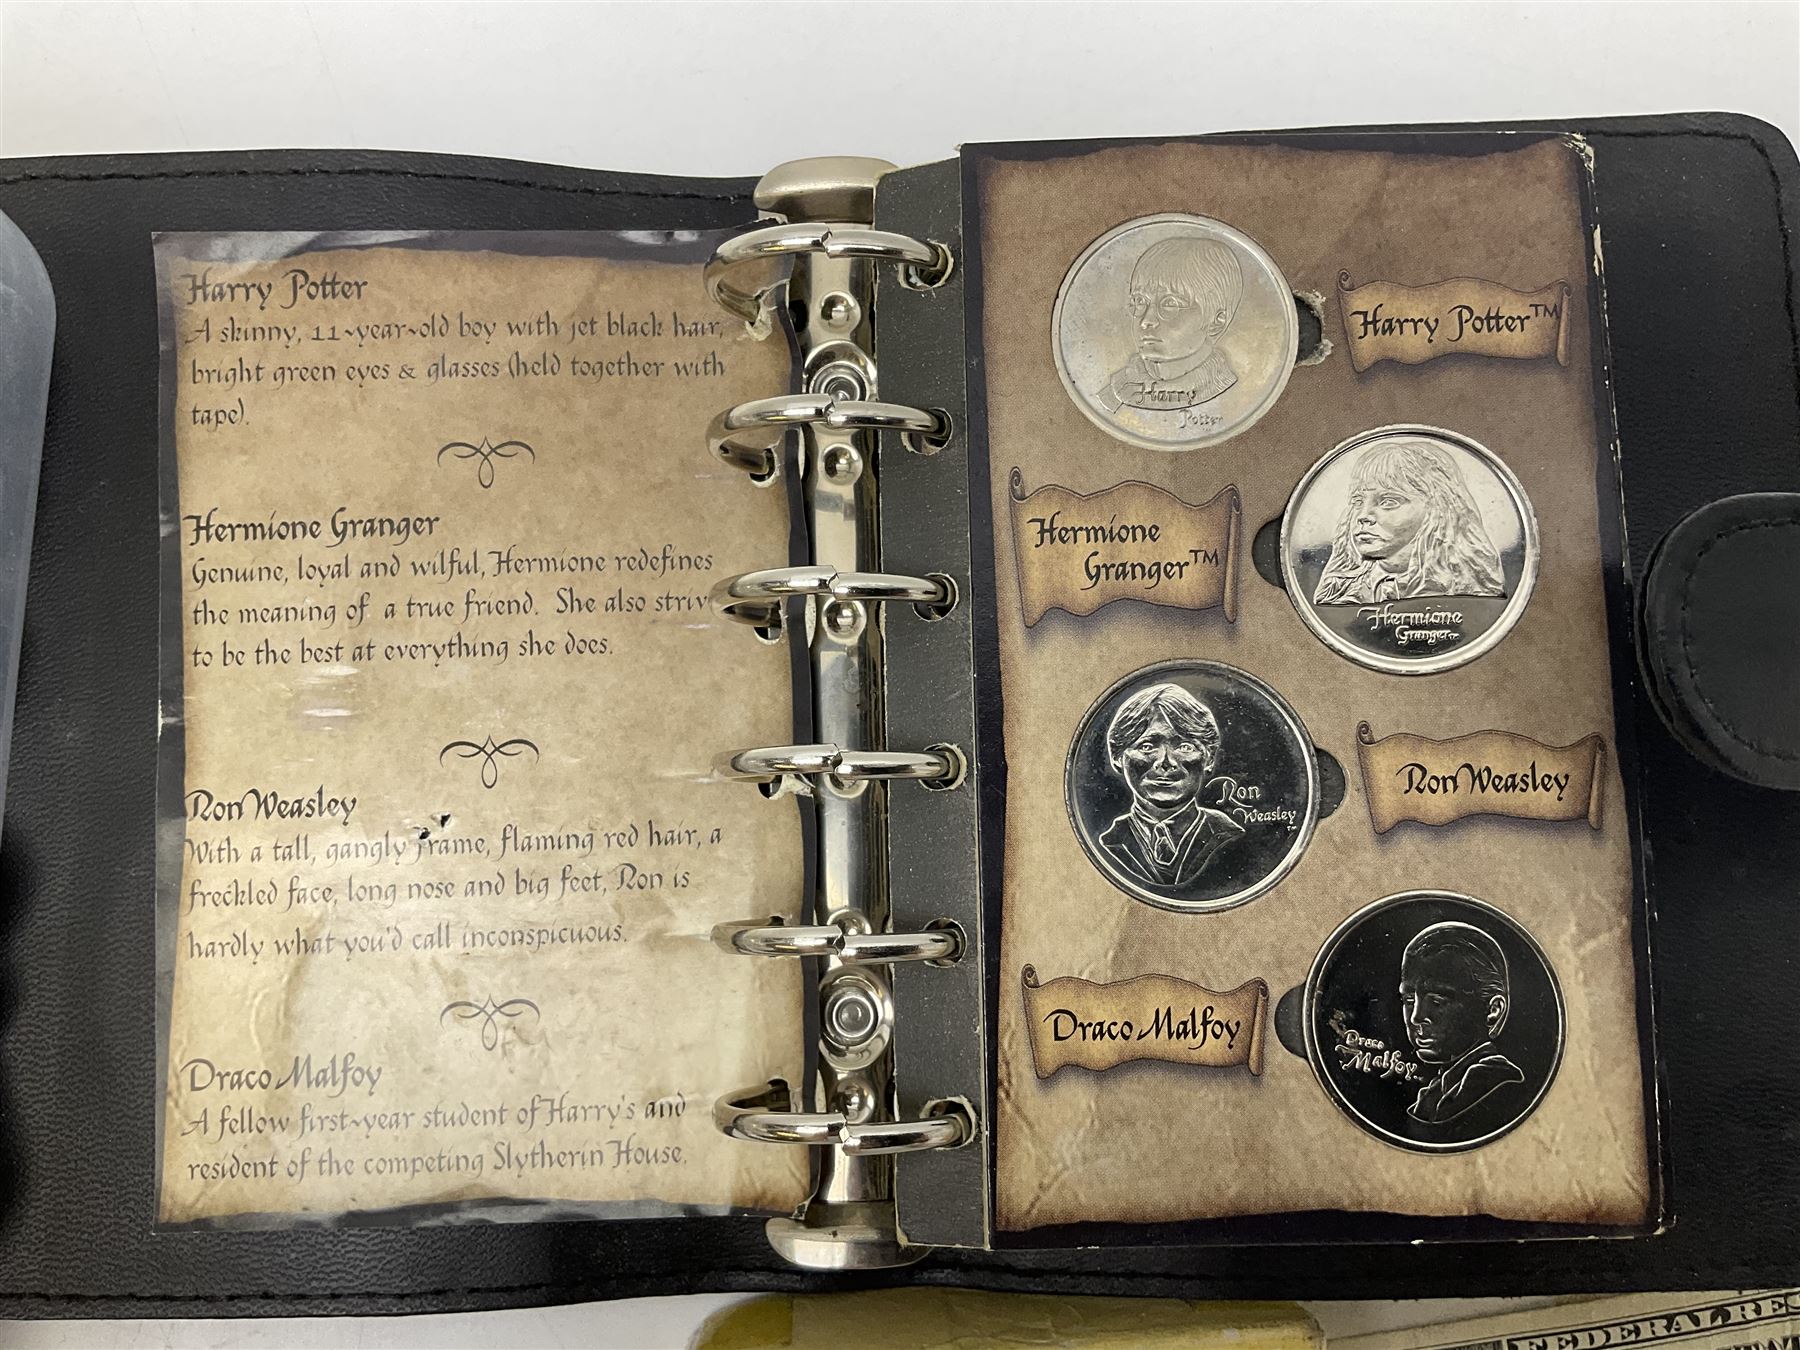 Harry Potter 'Gringotts Savings Book Coin Collection' - Image 2 of 12